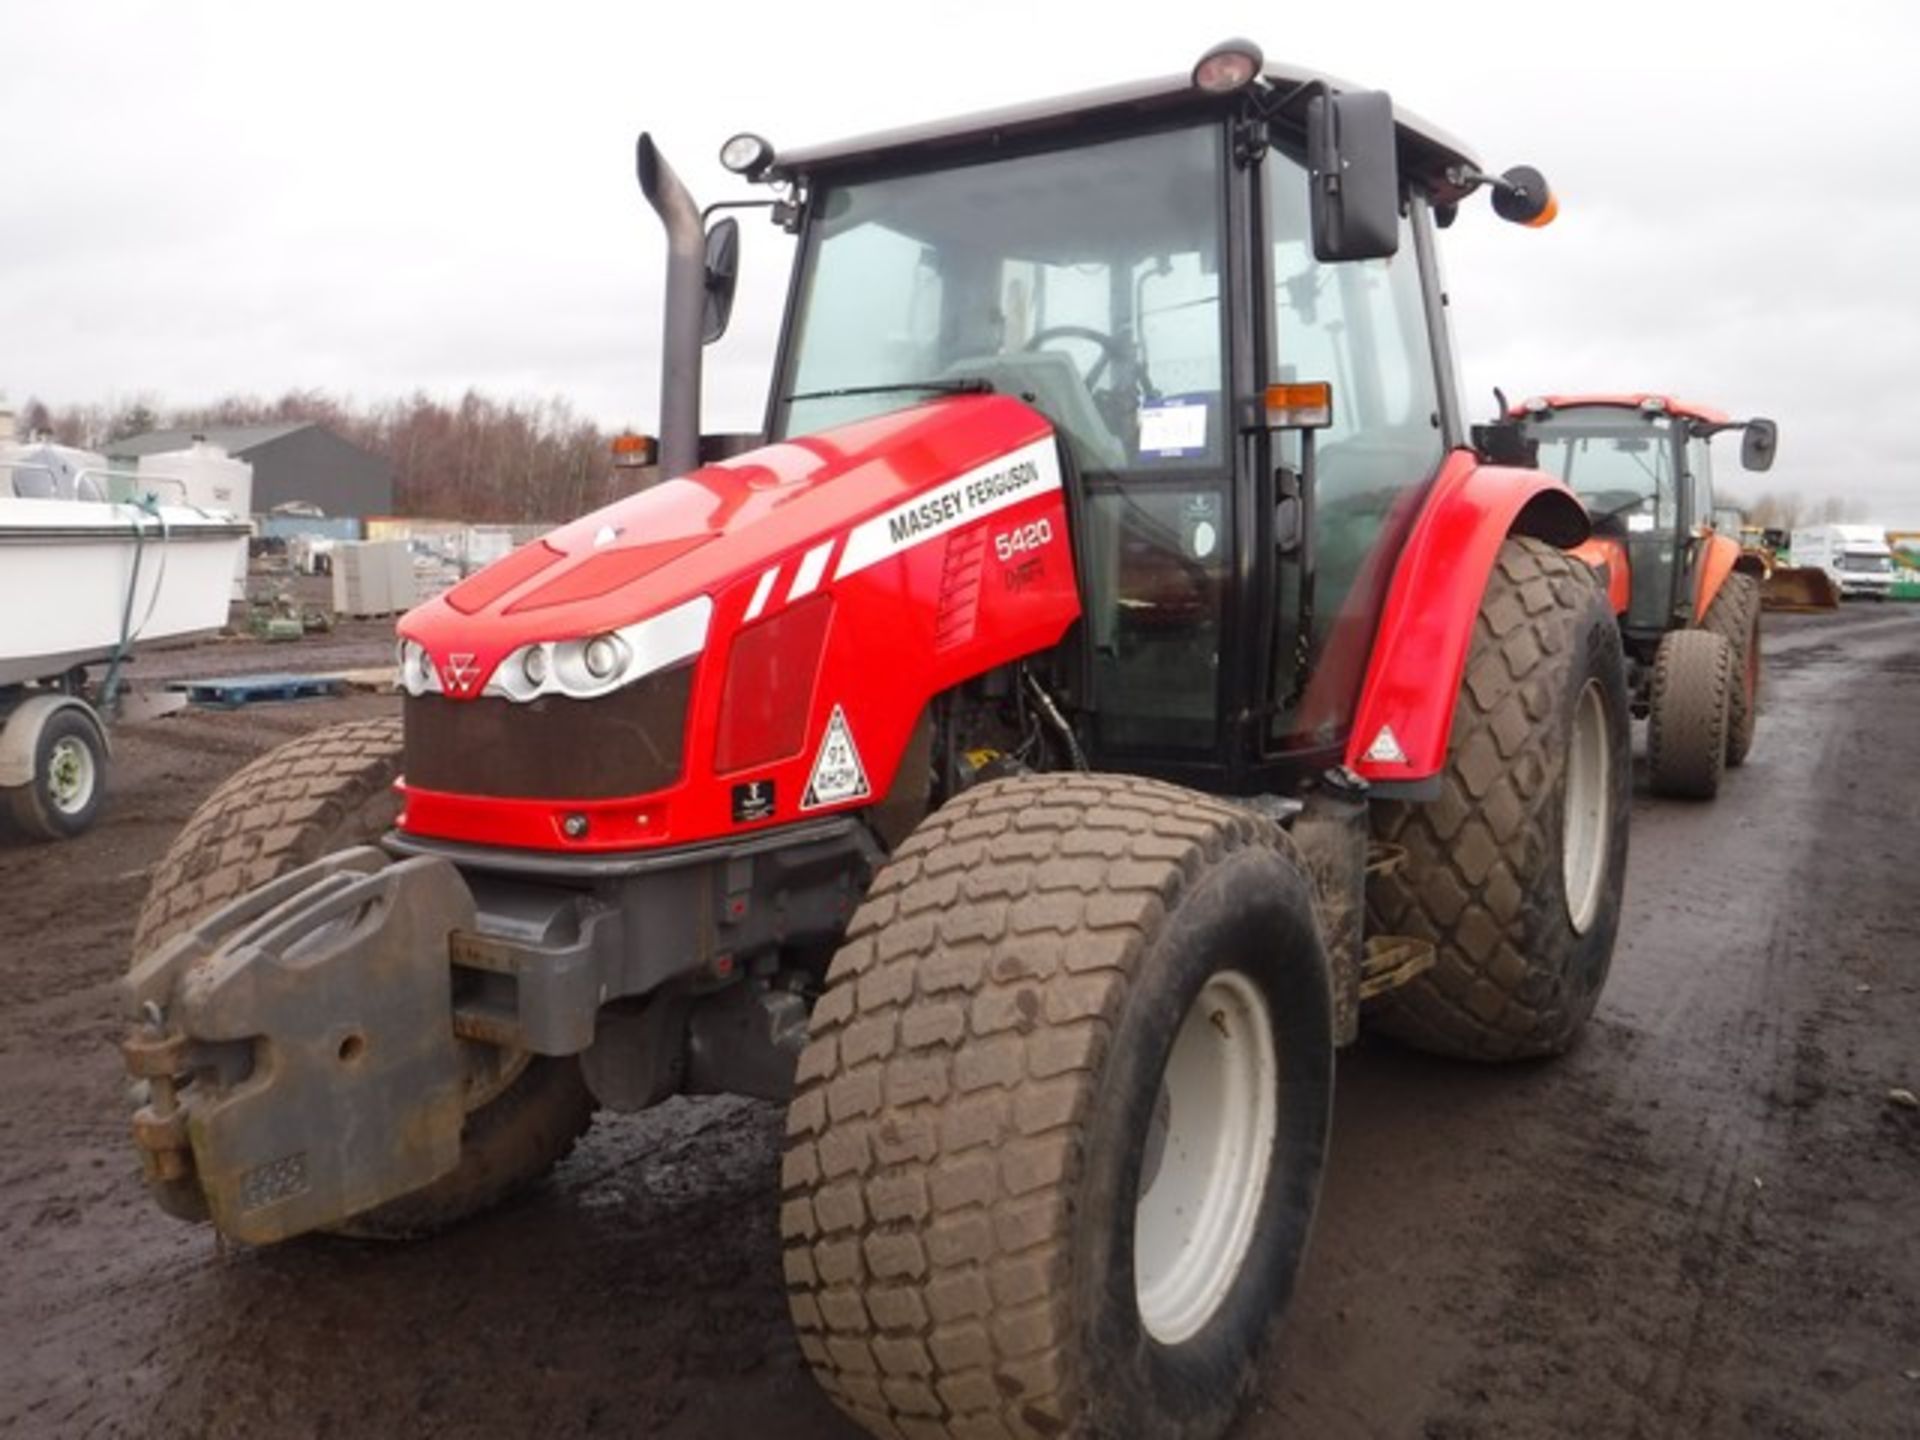 2013 MASSEY FERGUSON 5420 AGRIC TRACTOR REG - SF13HND - 4499HRS - Image 3 of 17